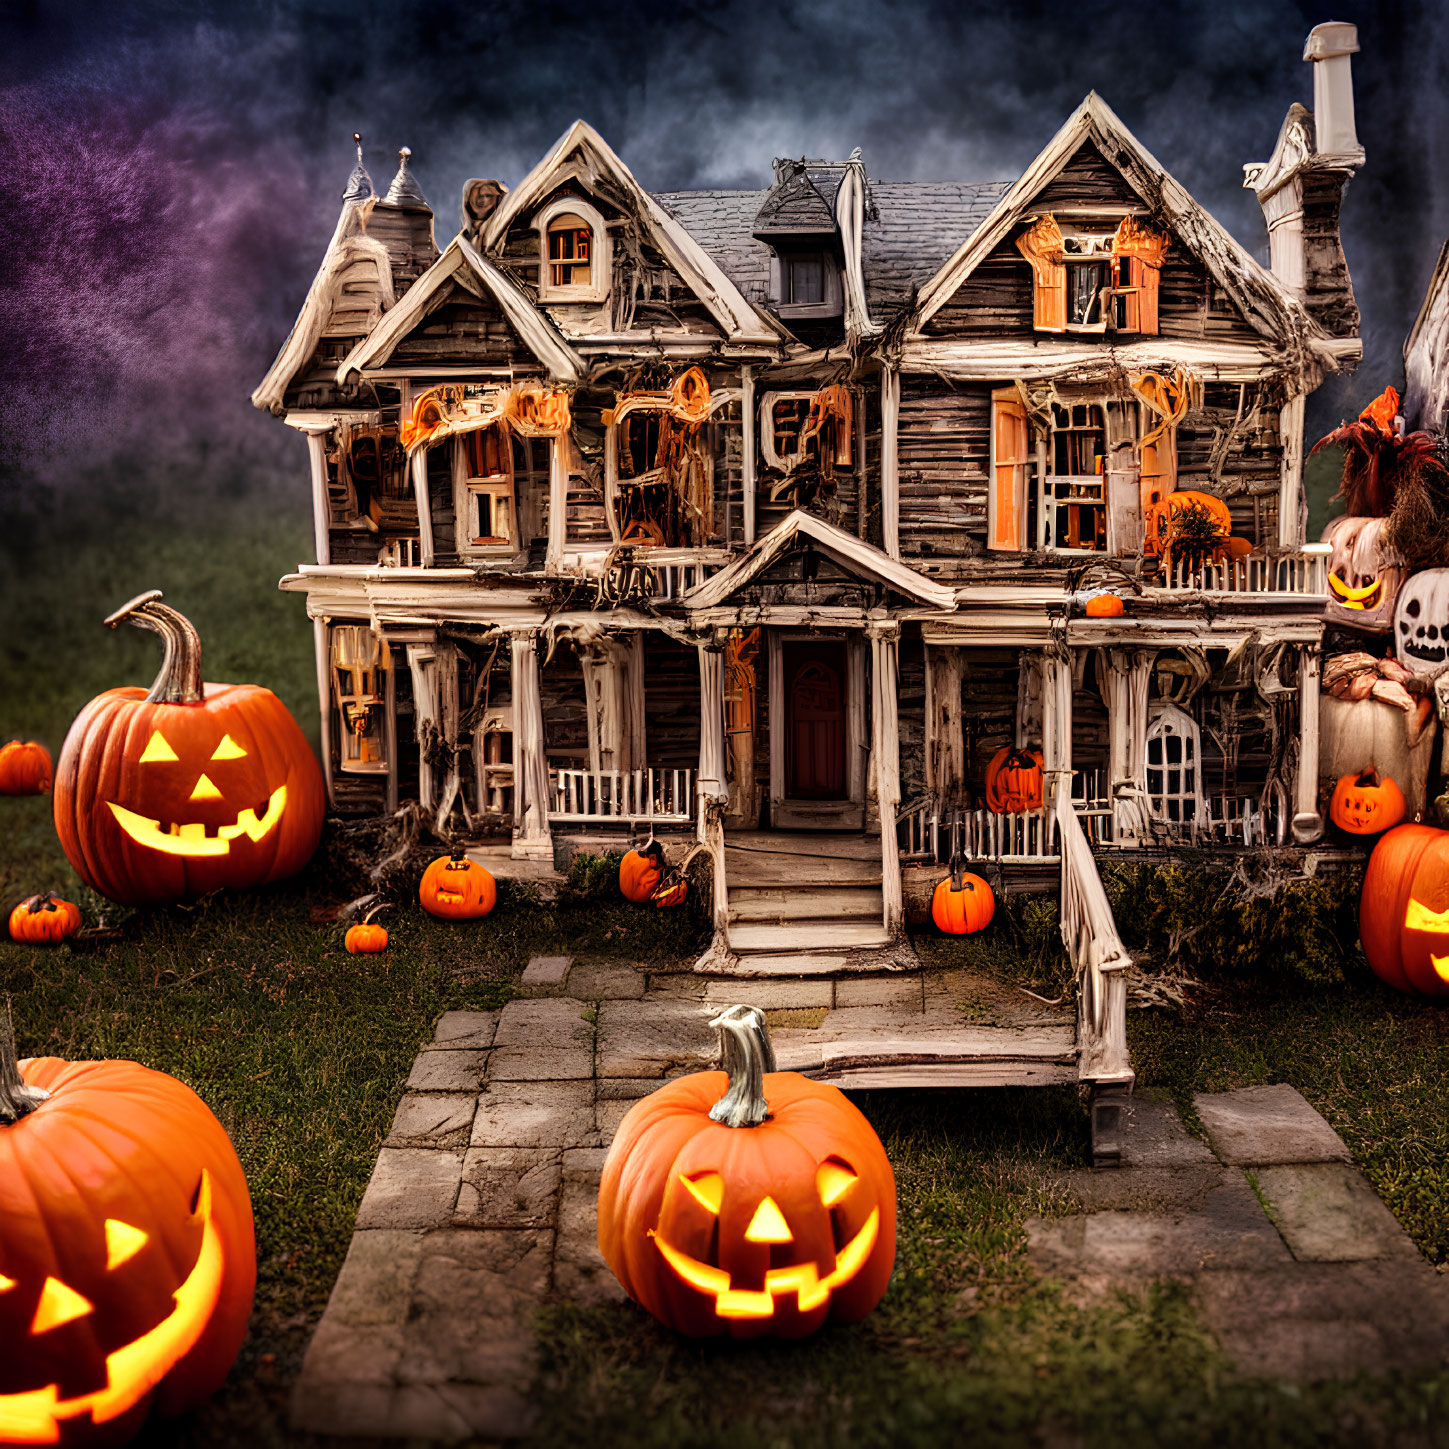 Miniature Halloween haunted house with pumpkins, leaves, and skeletons at dusk